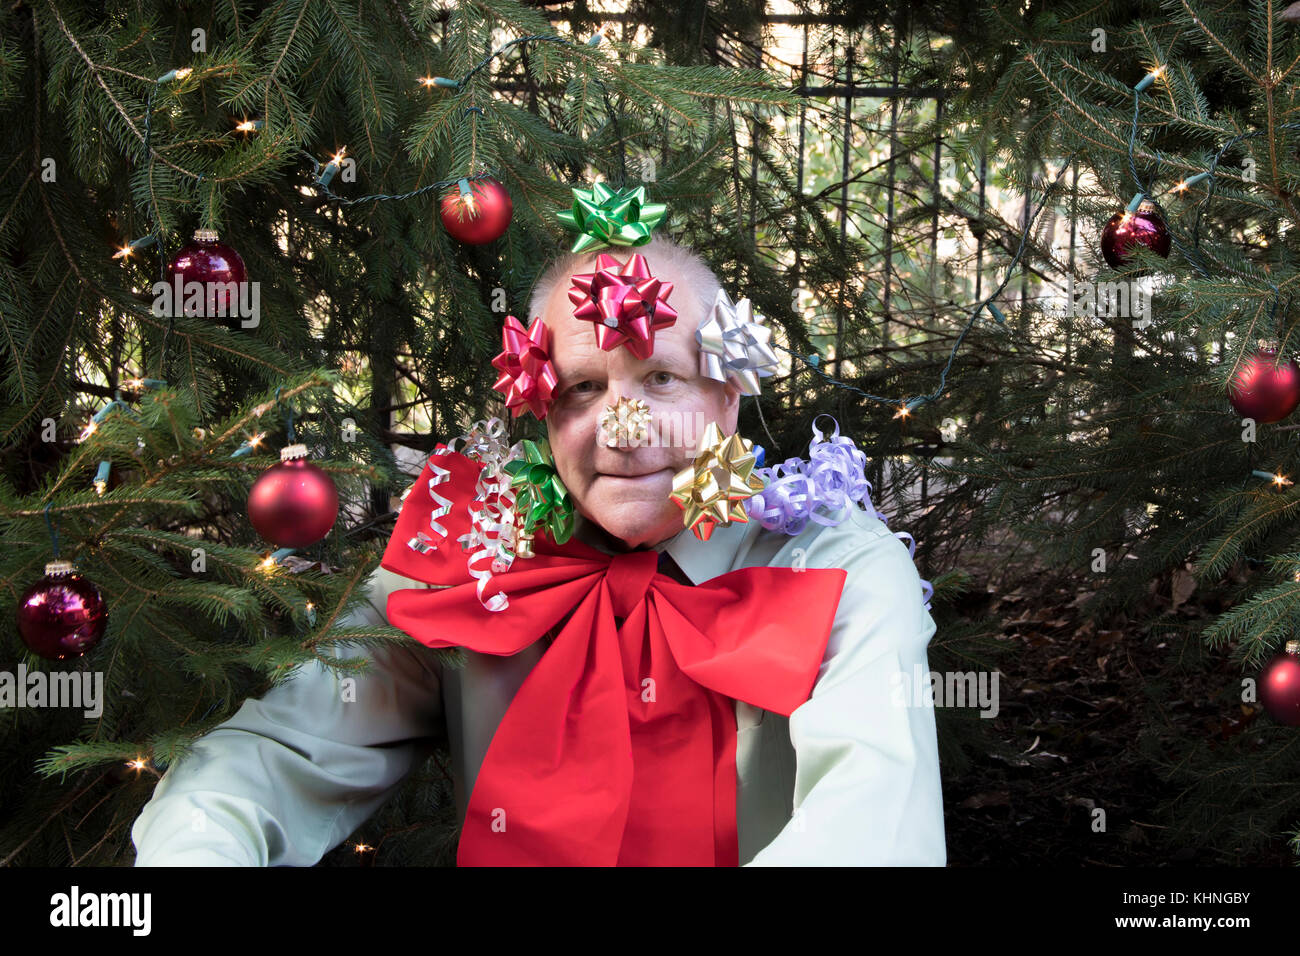 Man covered with Christmas bows sitting under pine trees decorated with lights and red balls. Stock Photo